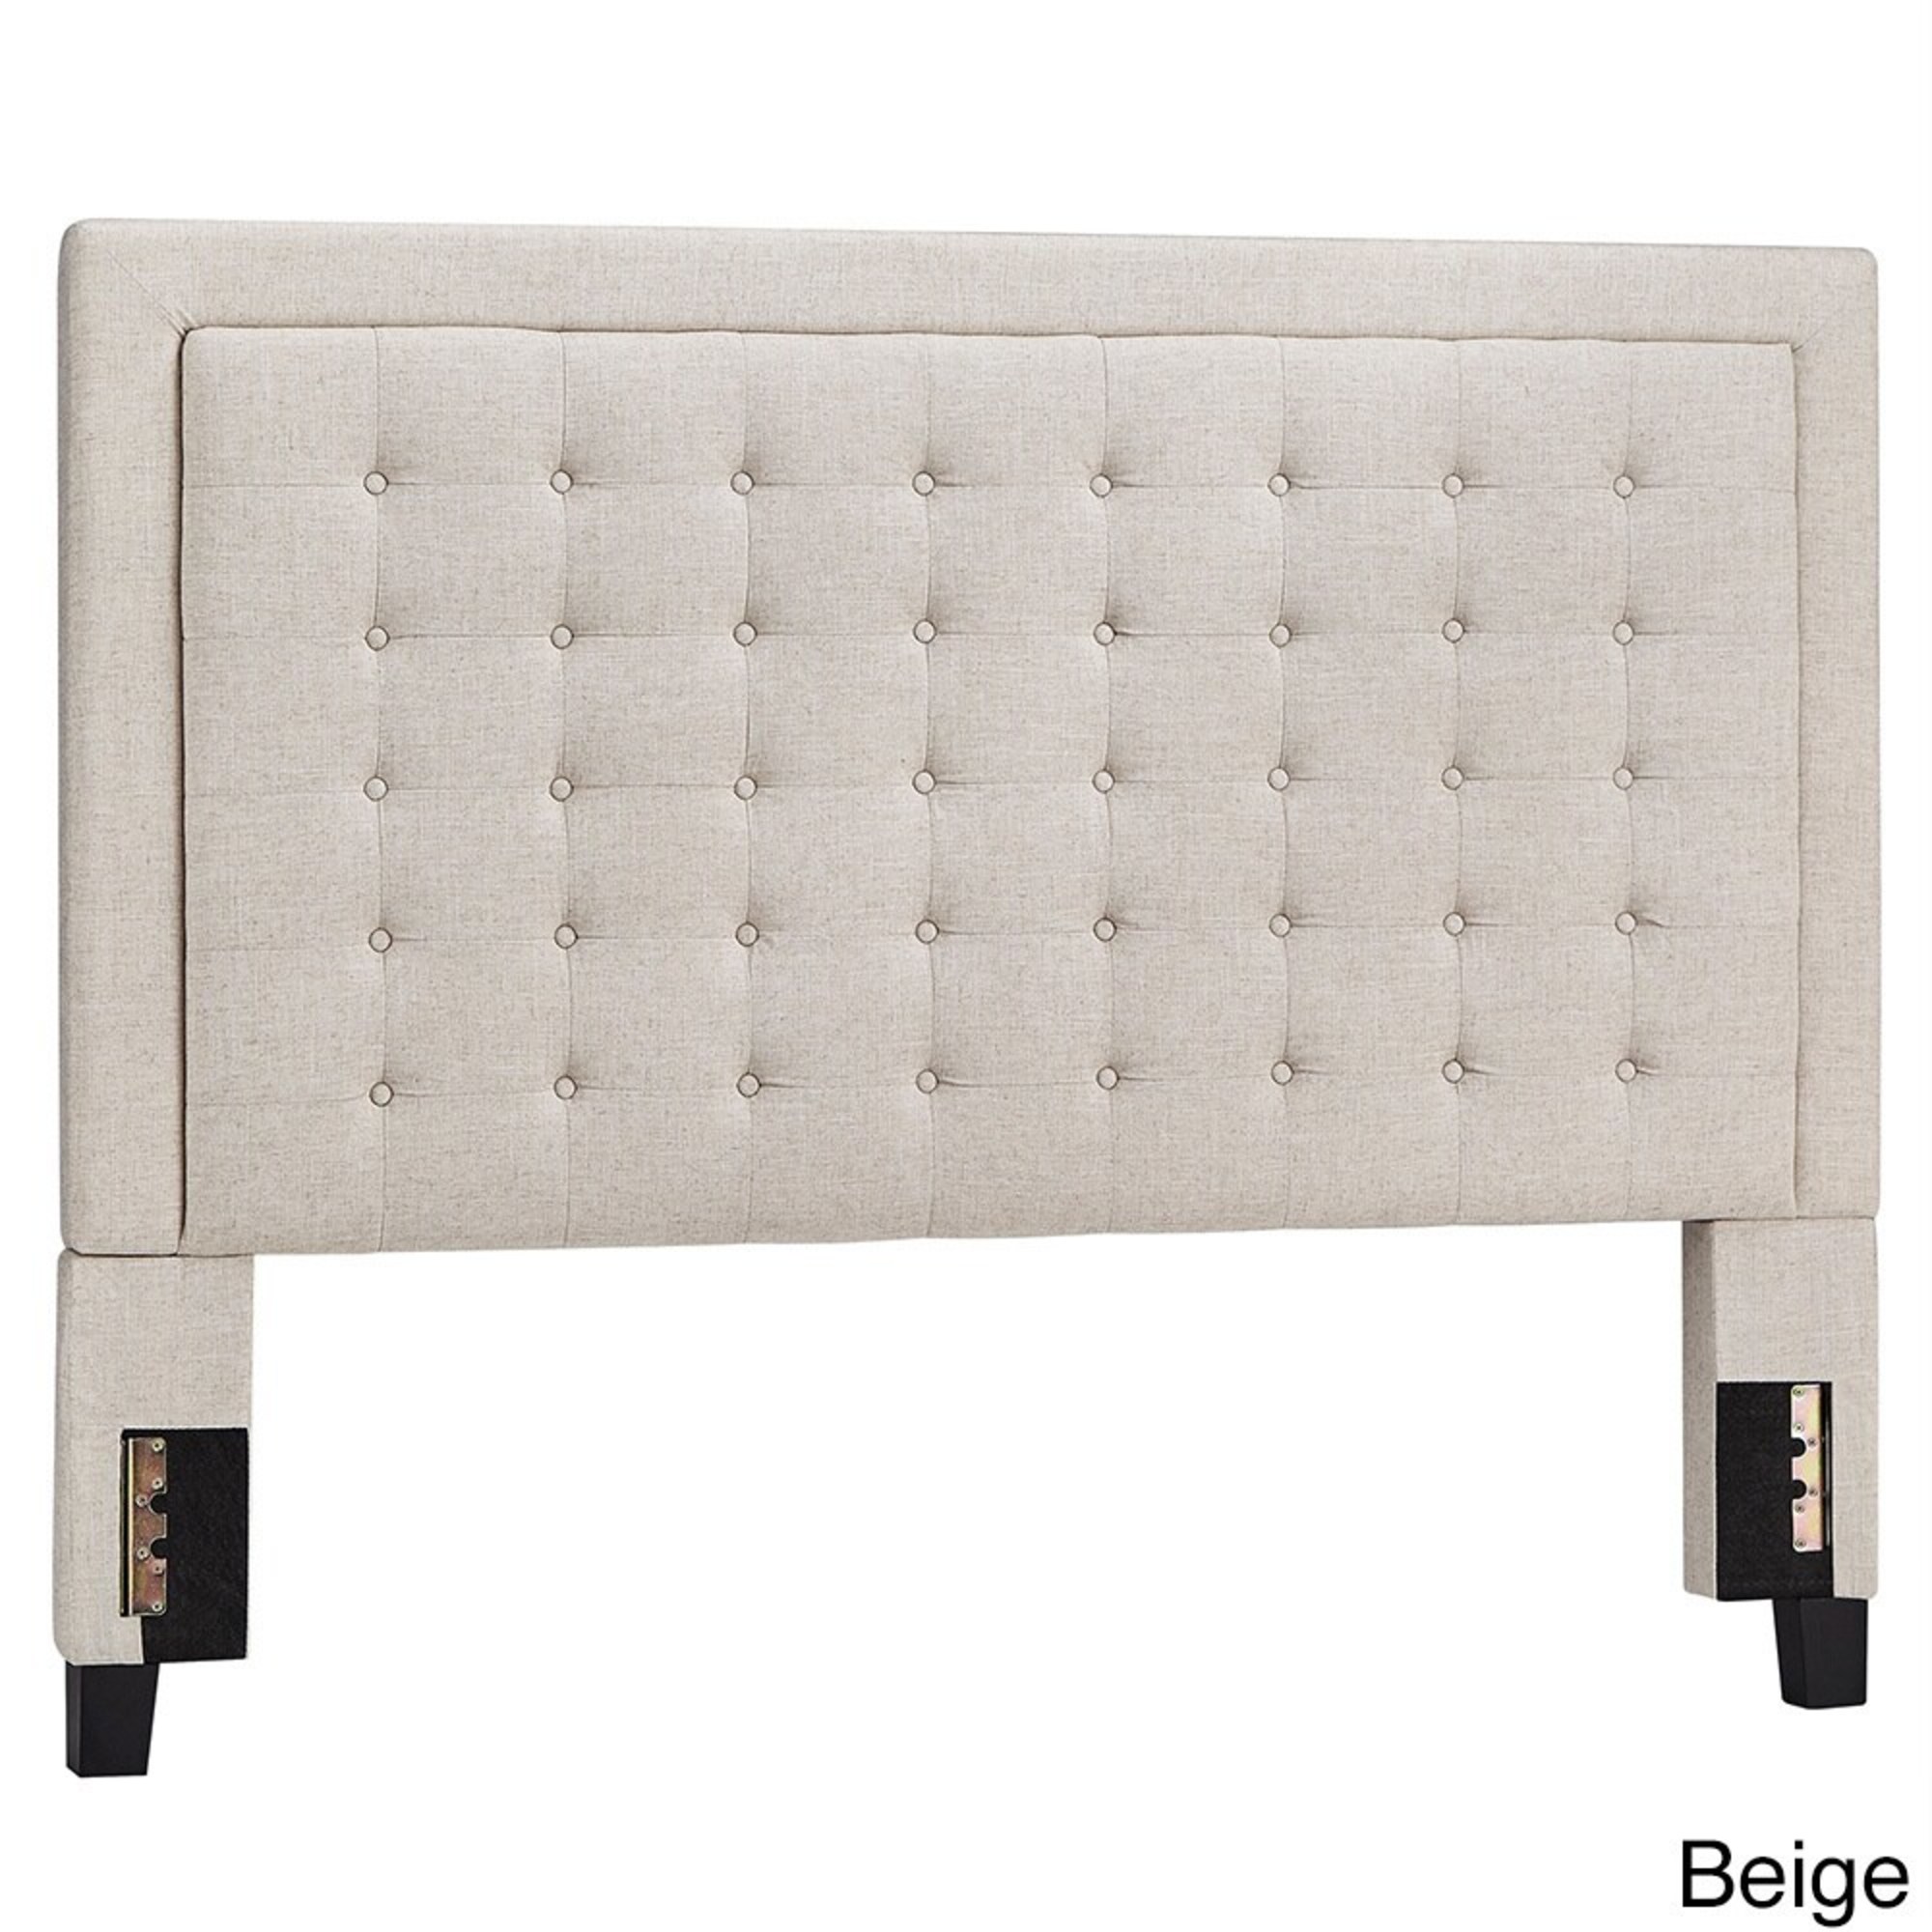 Weston Home Aurelia Square Button-Tufted Upholstered King Headboard, Beige - image 1 of 2